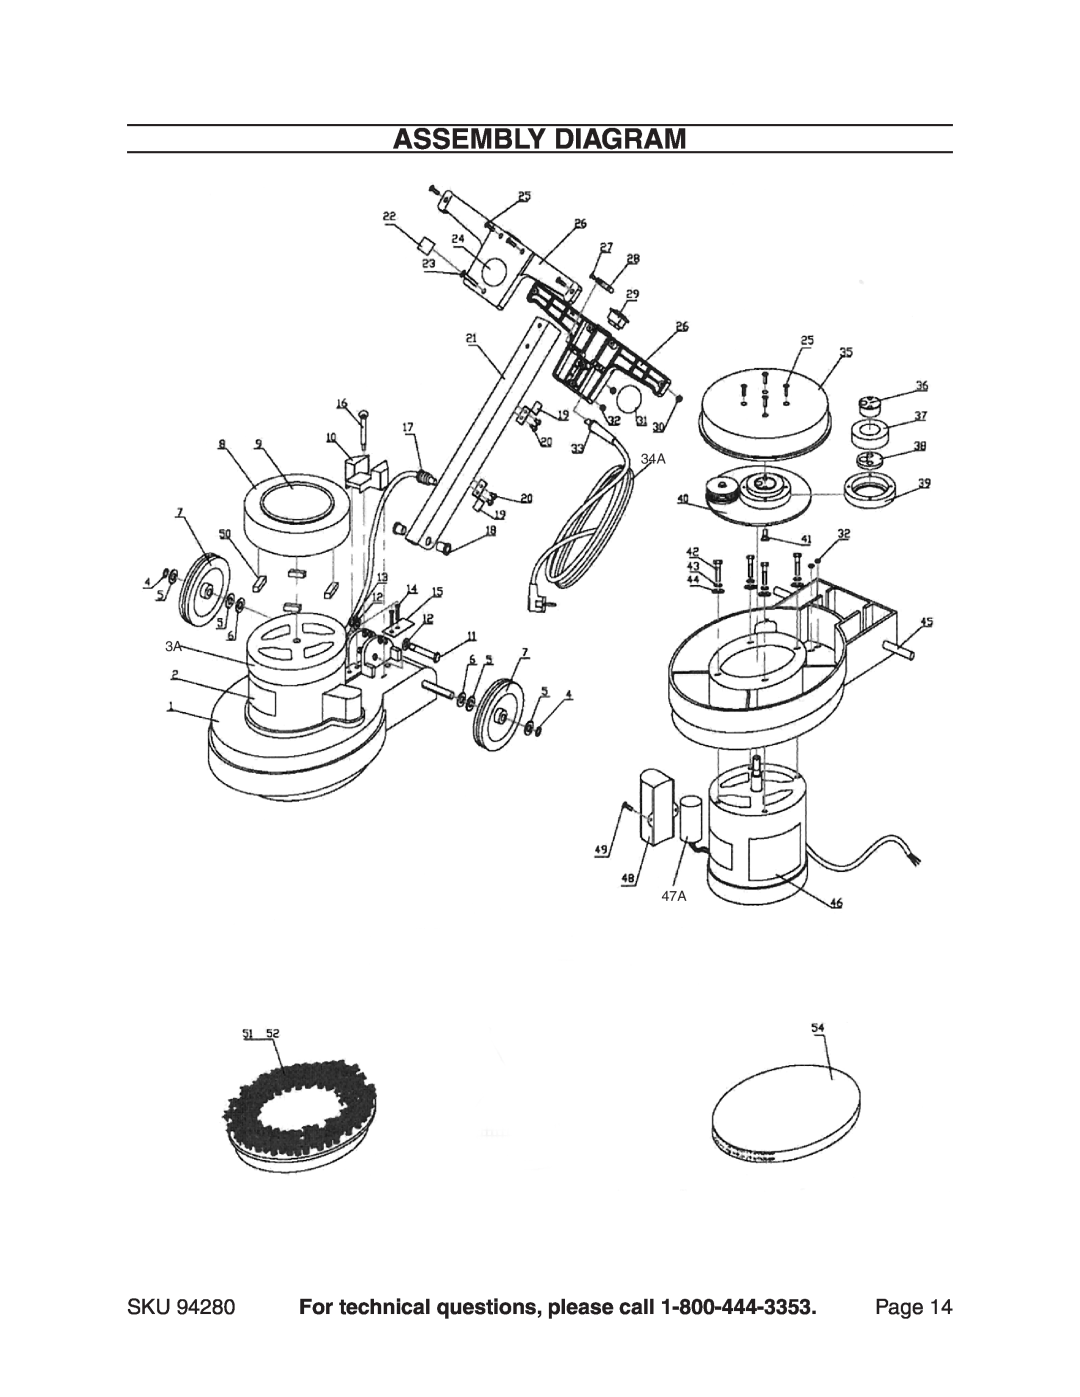 Harbor Freight Tools 94280 manual Assembly Diagram, For technical questions, please call, Page, 34A 3A 47A 